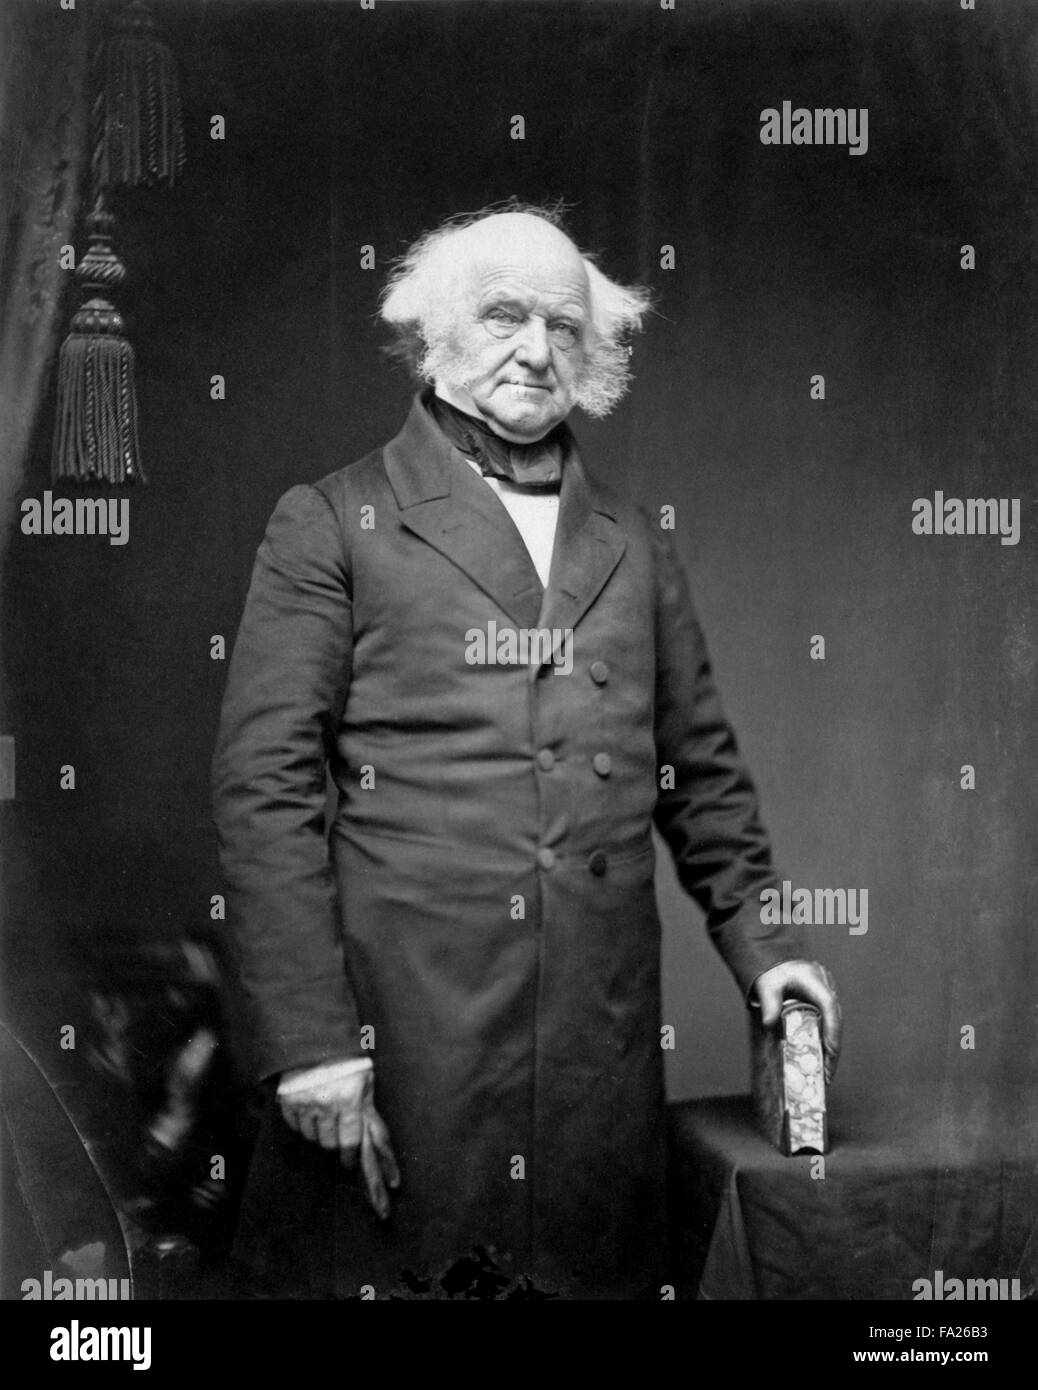 Martin Van Buren, American politician who served as the 8th President of the United States (1837–1841). Stock Photo